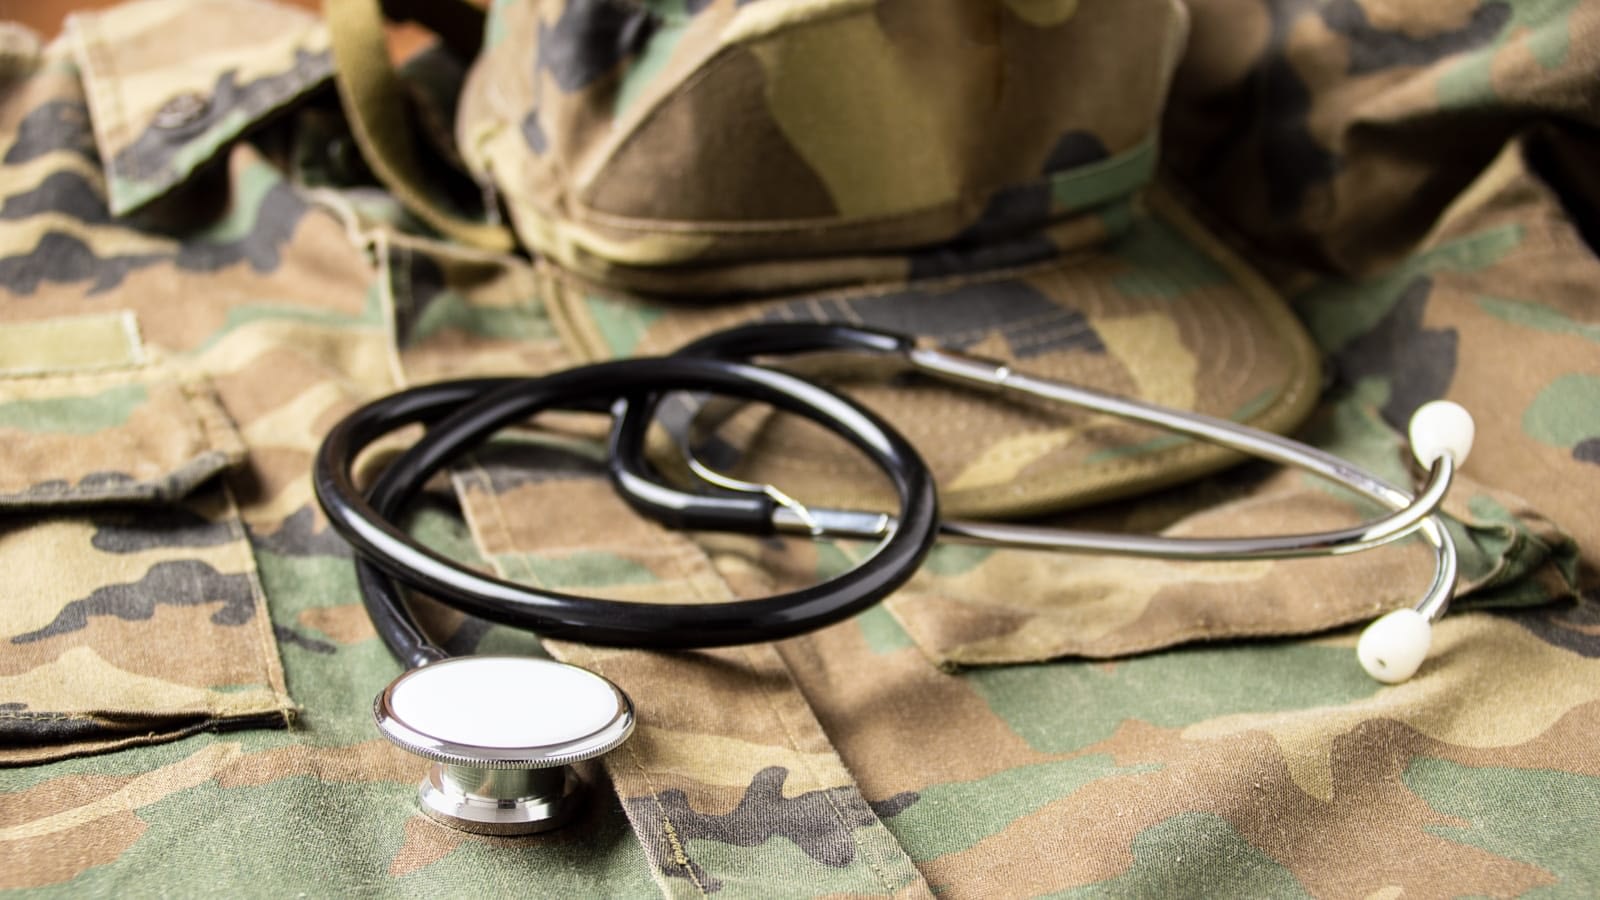 Army uniform and medical tool